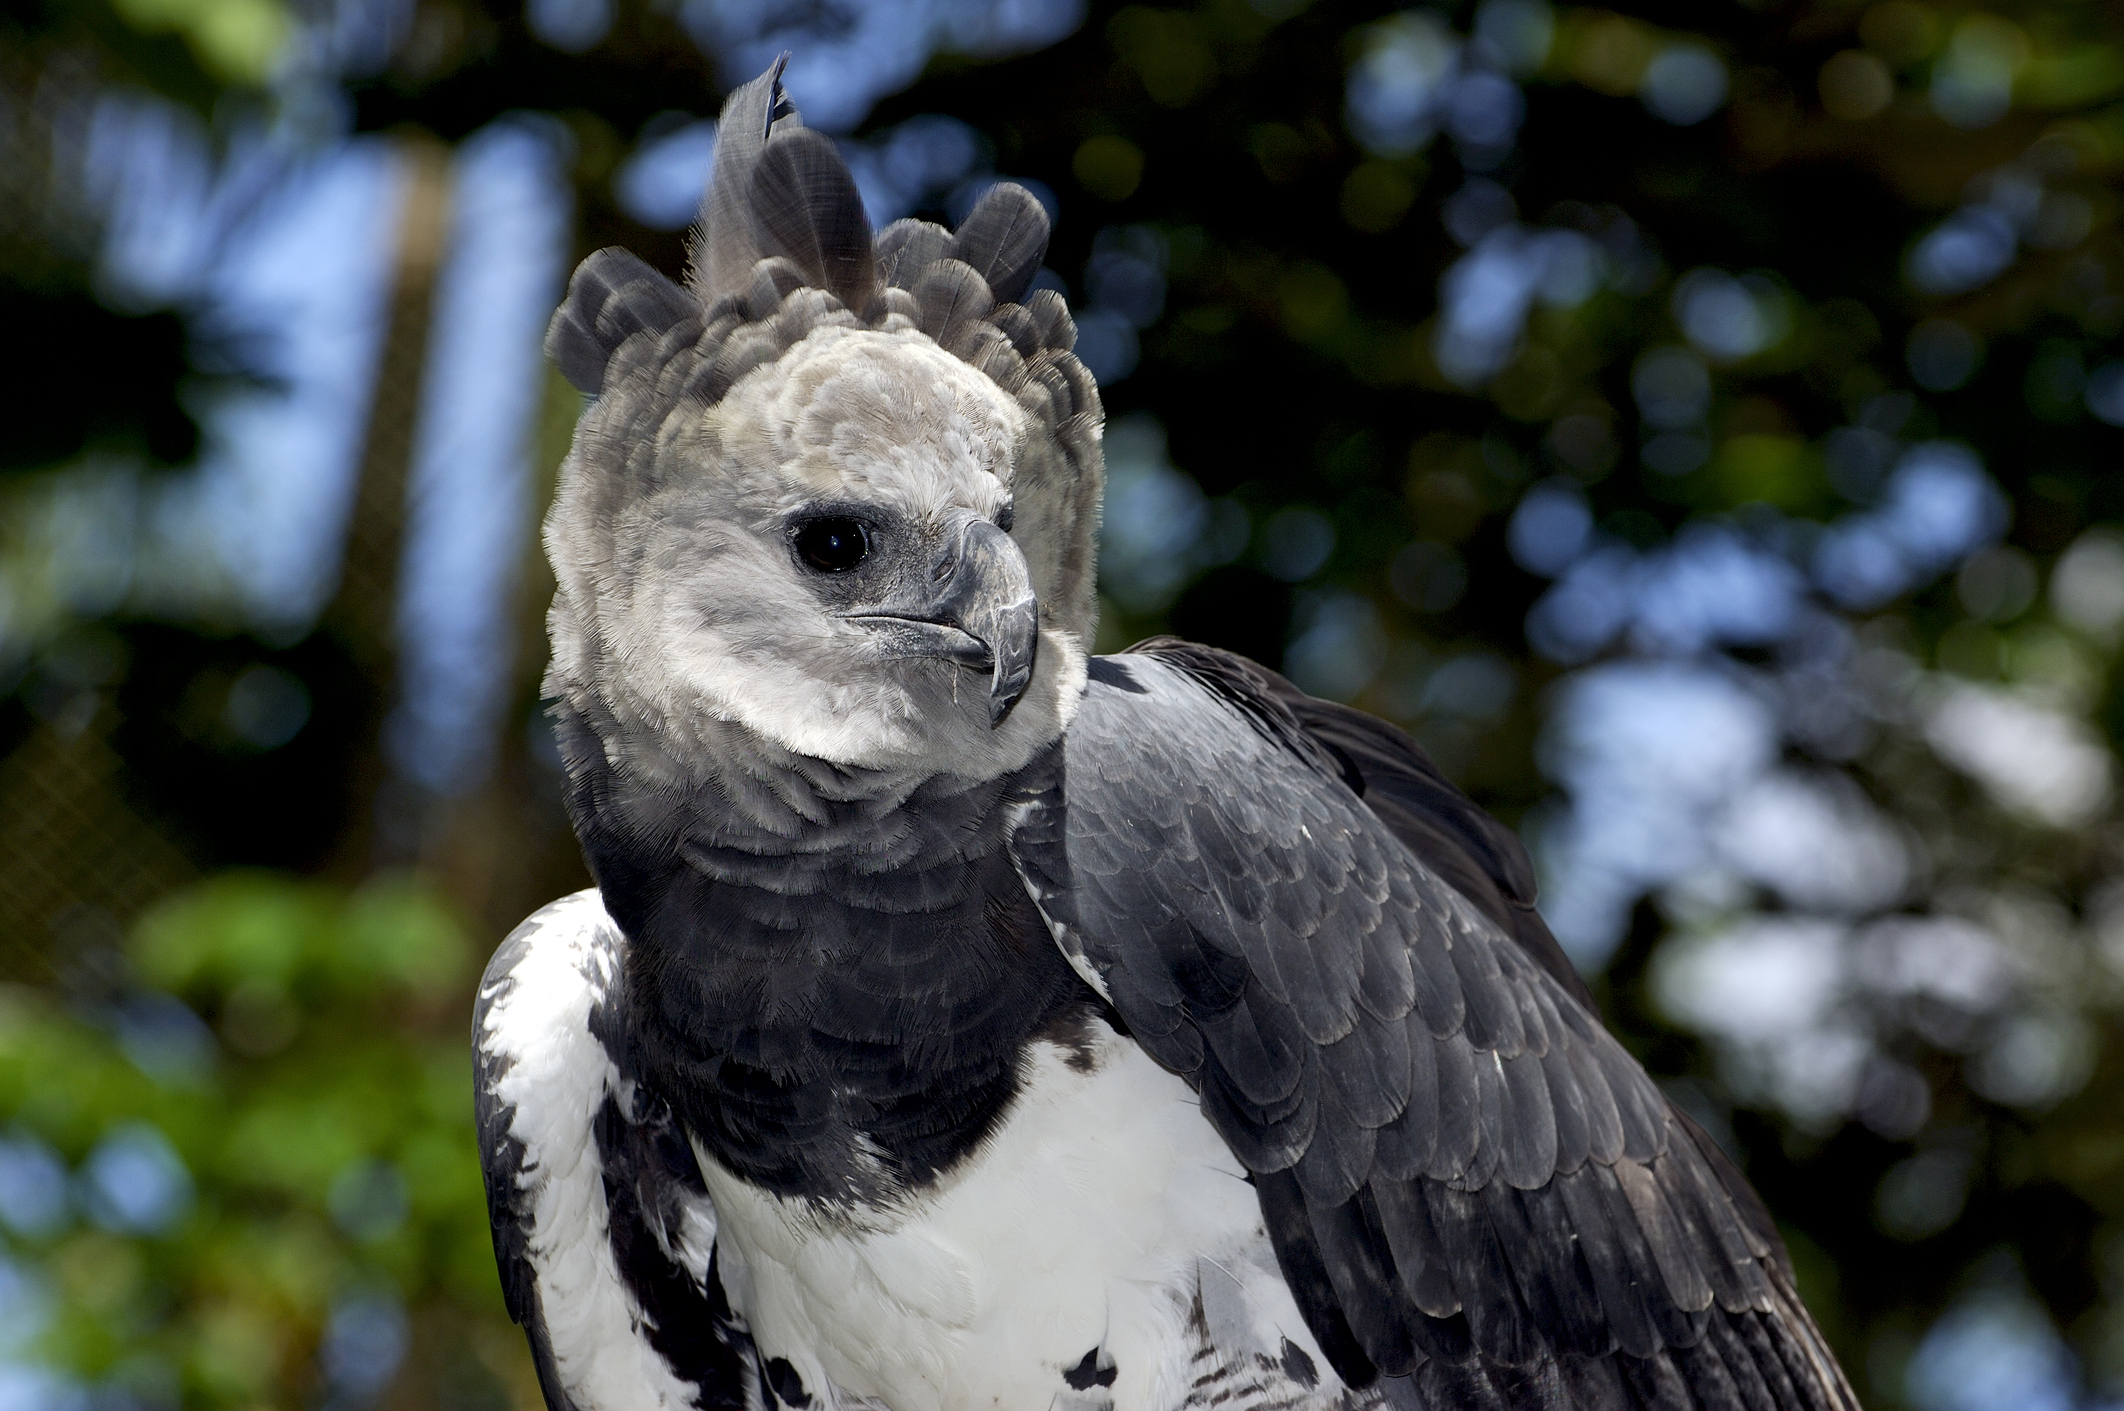 Awesome Stuff 365 - The harpy eagle is legendary, although few